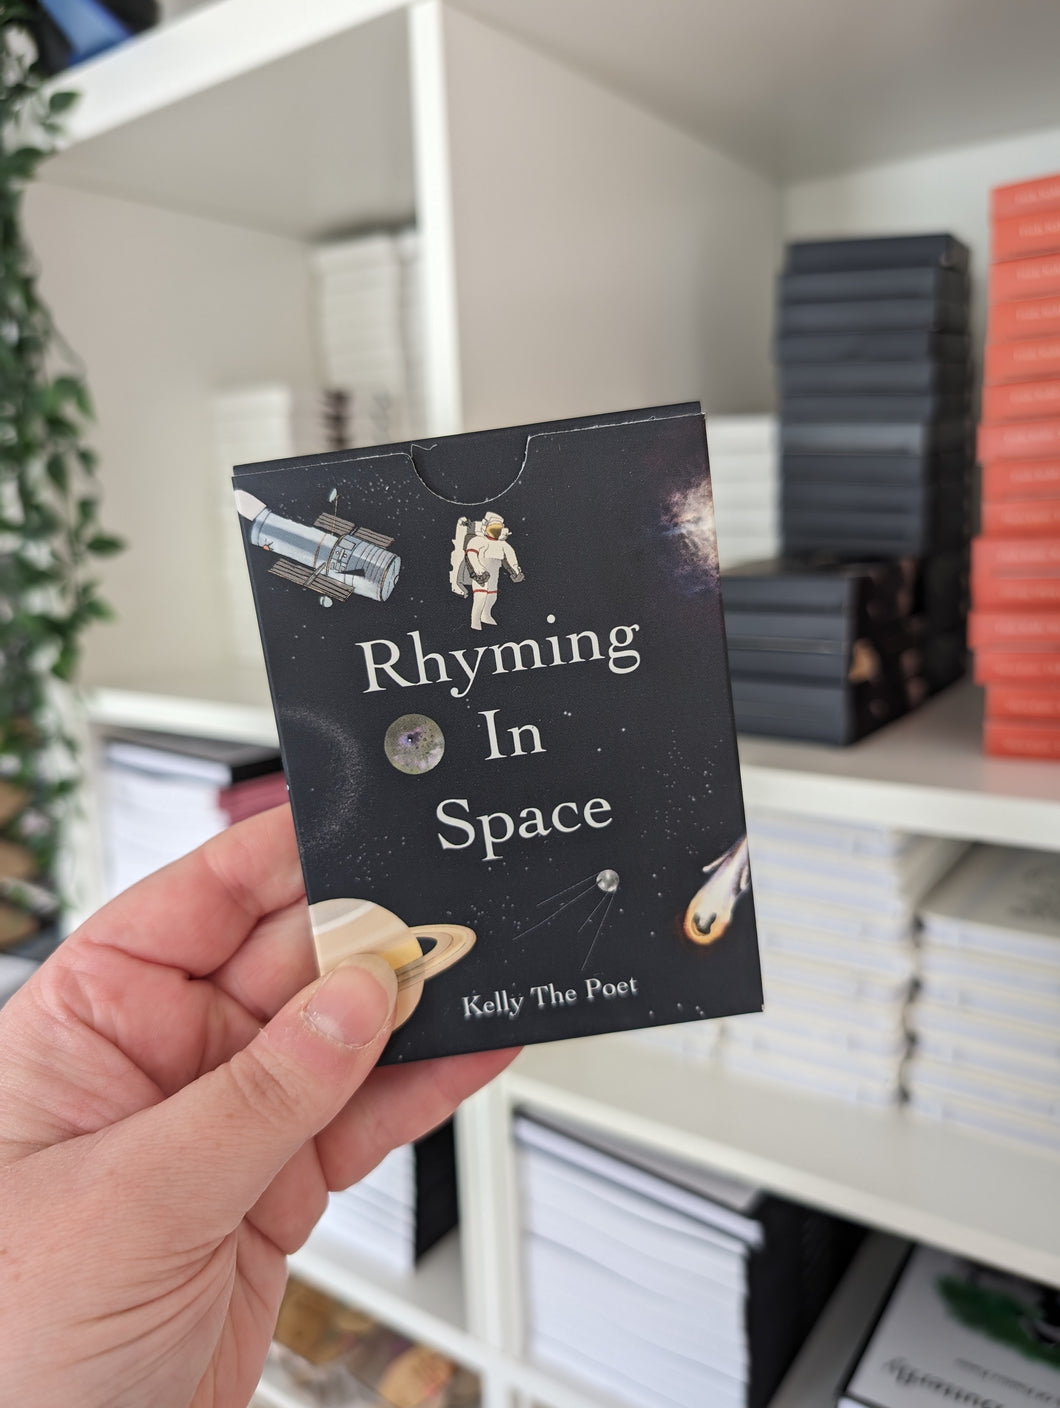 Old Design of Rhyming In Space